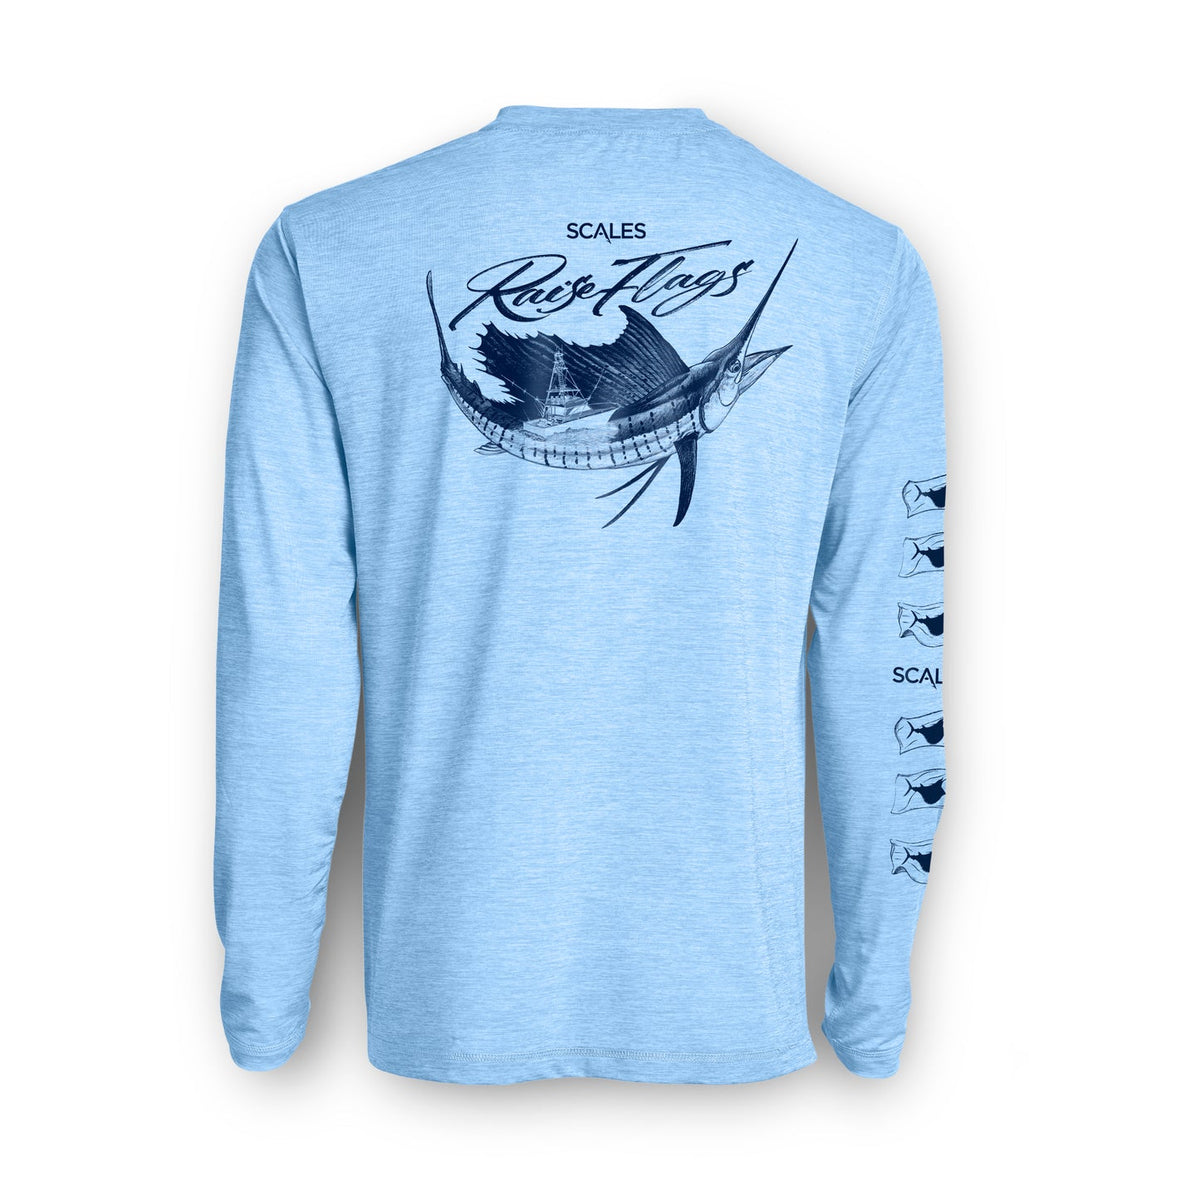 SCALES Popping Sails Active Performance Long Sleeve